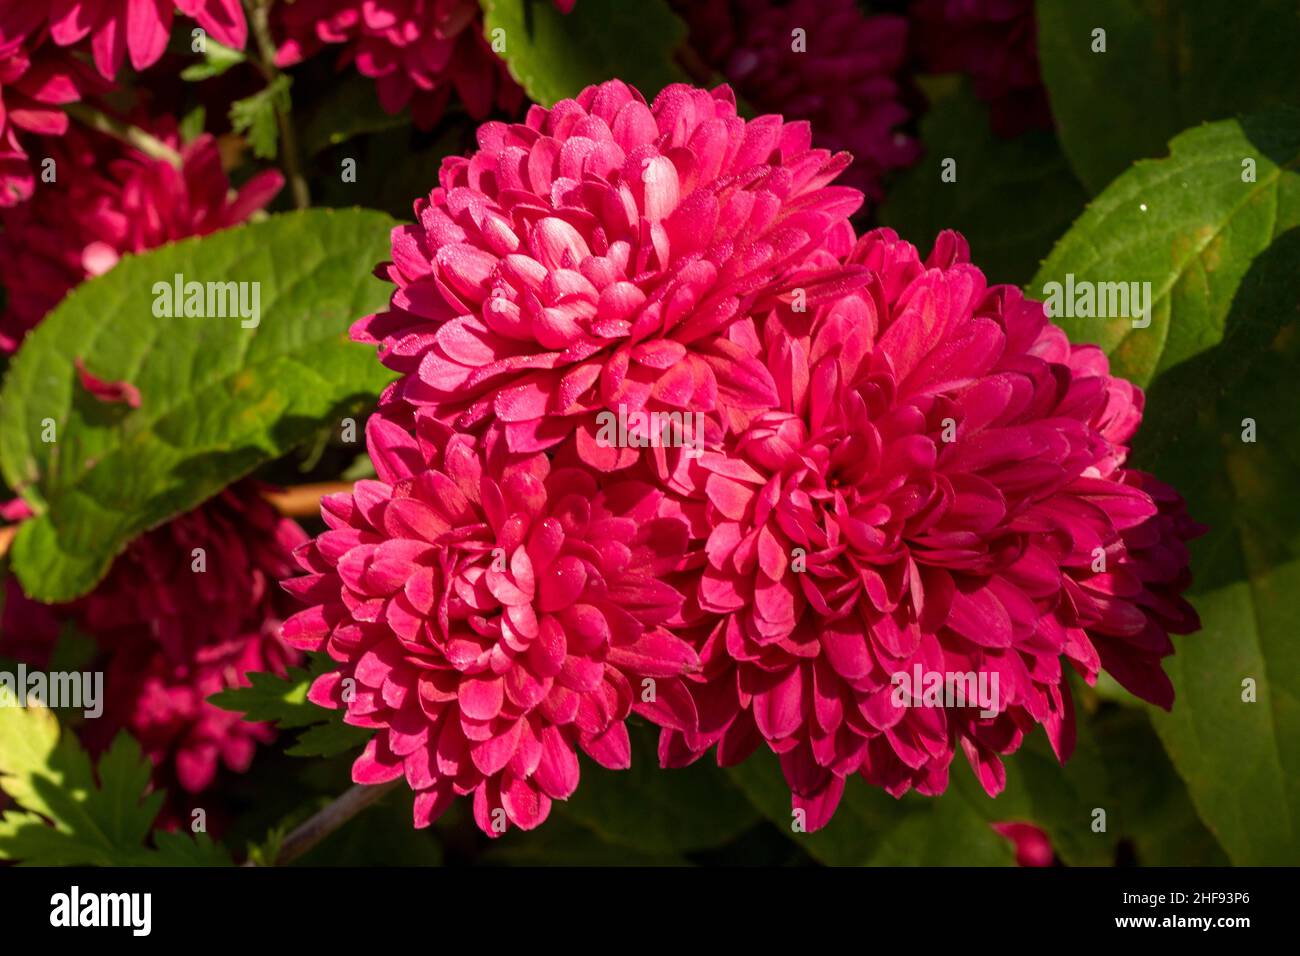 Blooming Chrysanthemums, natural close-up flower portraits Stock Photo